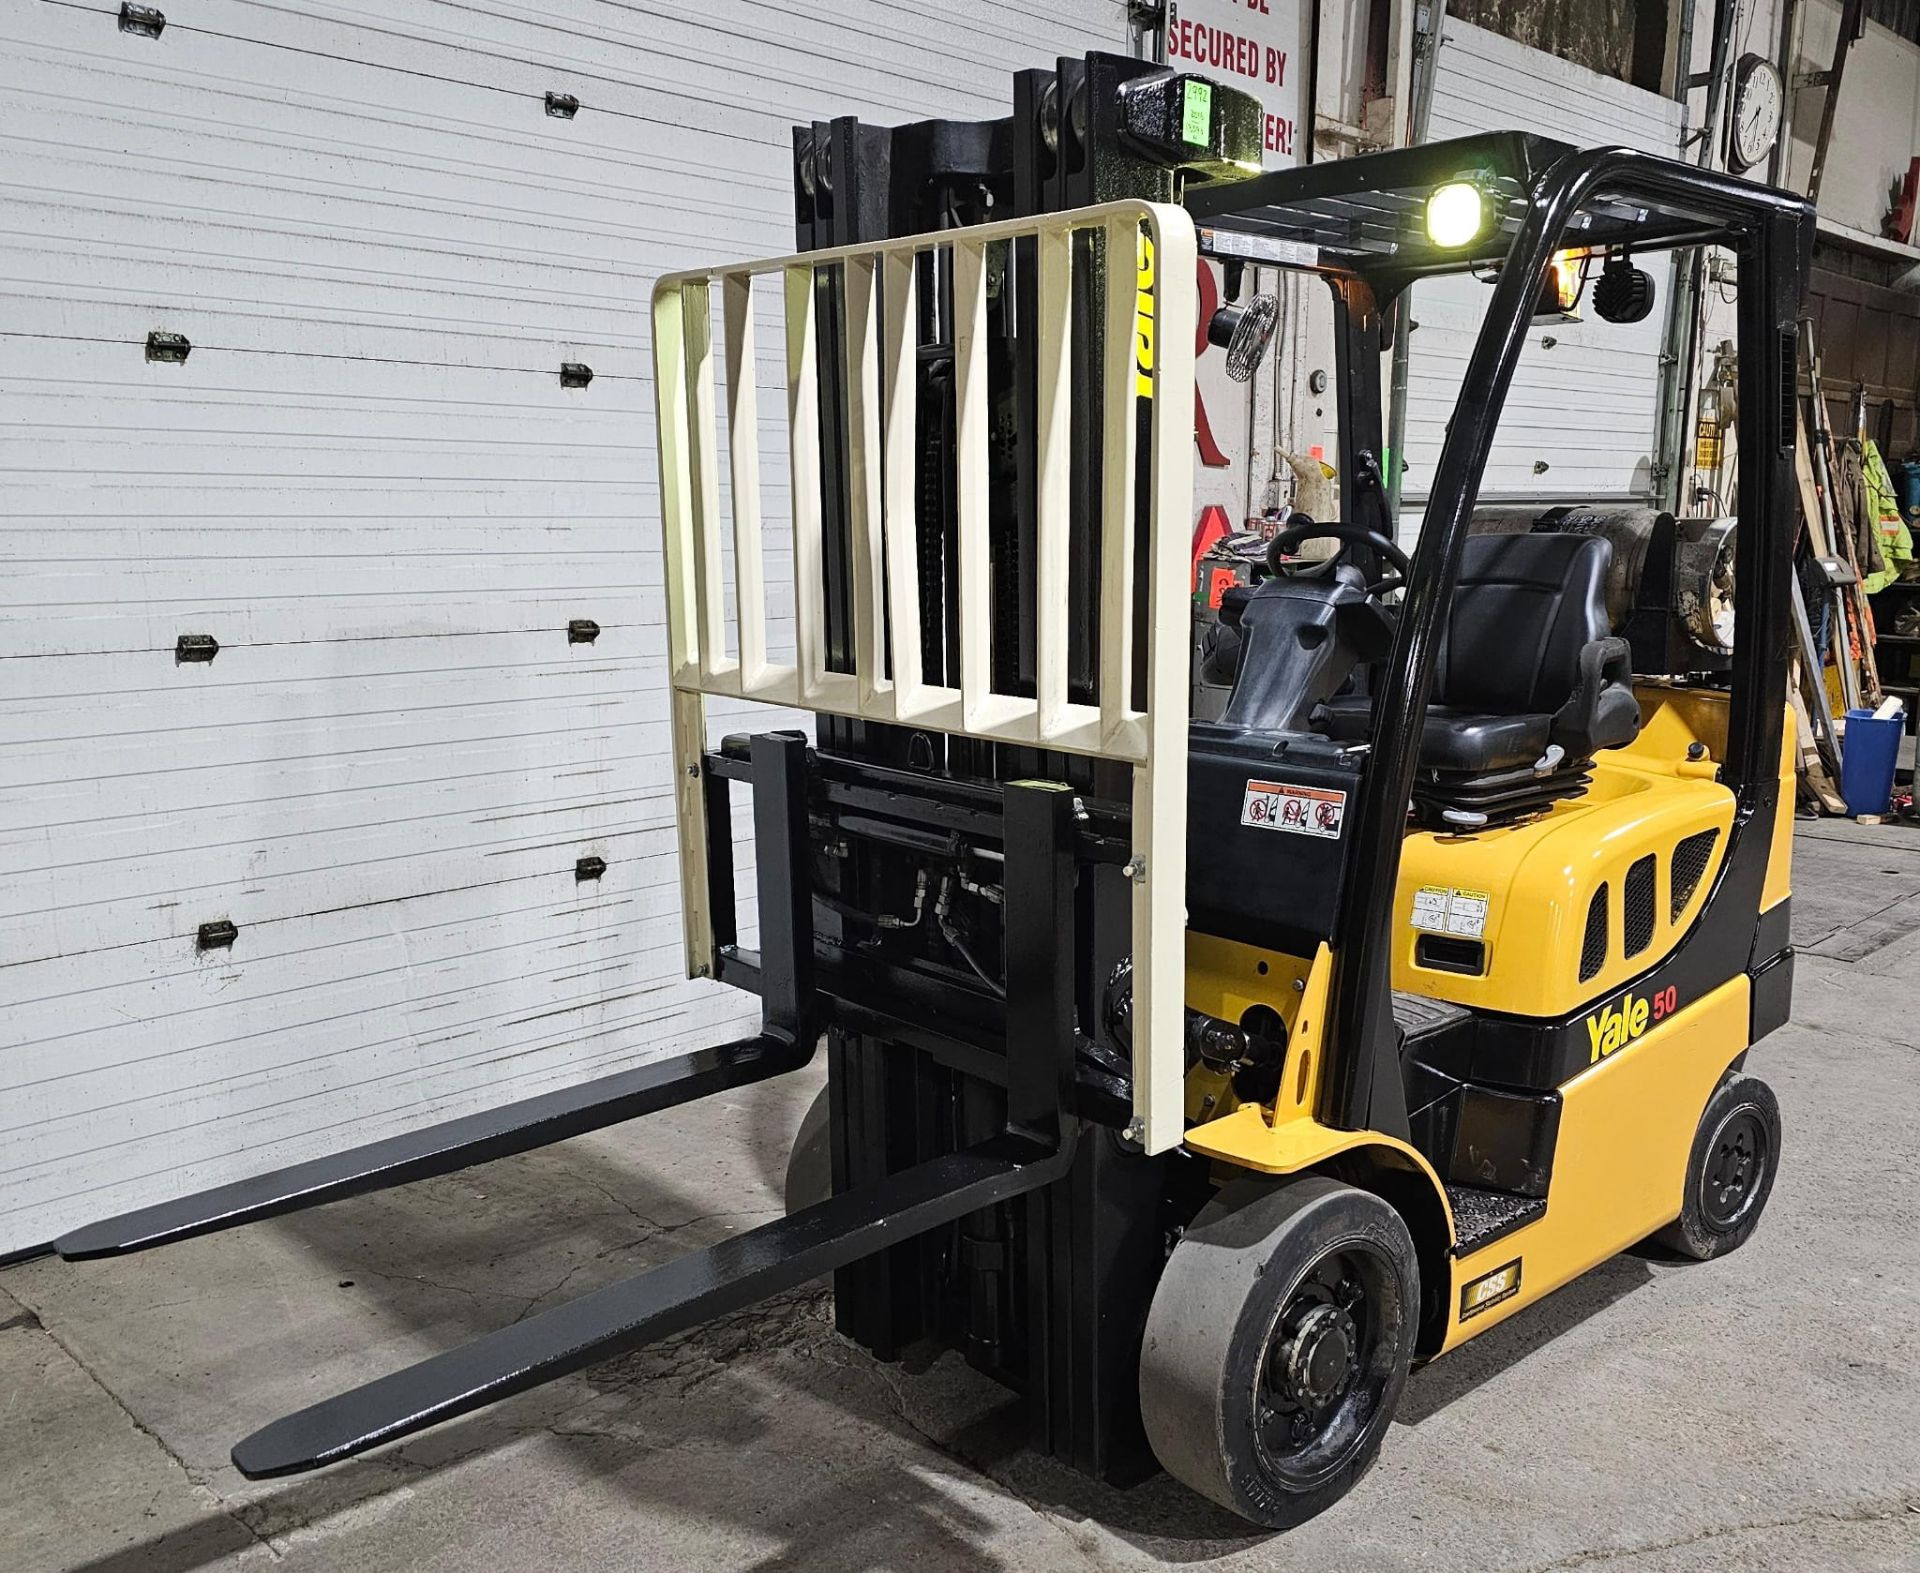 2016 Yale 5,000lbs Capacity LPG (Propane) Forklift 3-STAGE MAST with 4 functions 194.9" load - Bild 4 aus 6